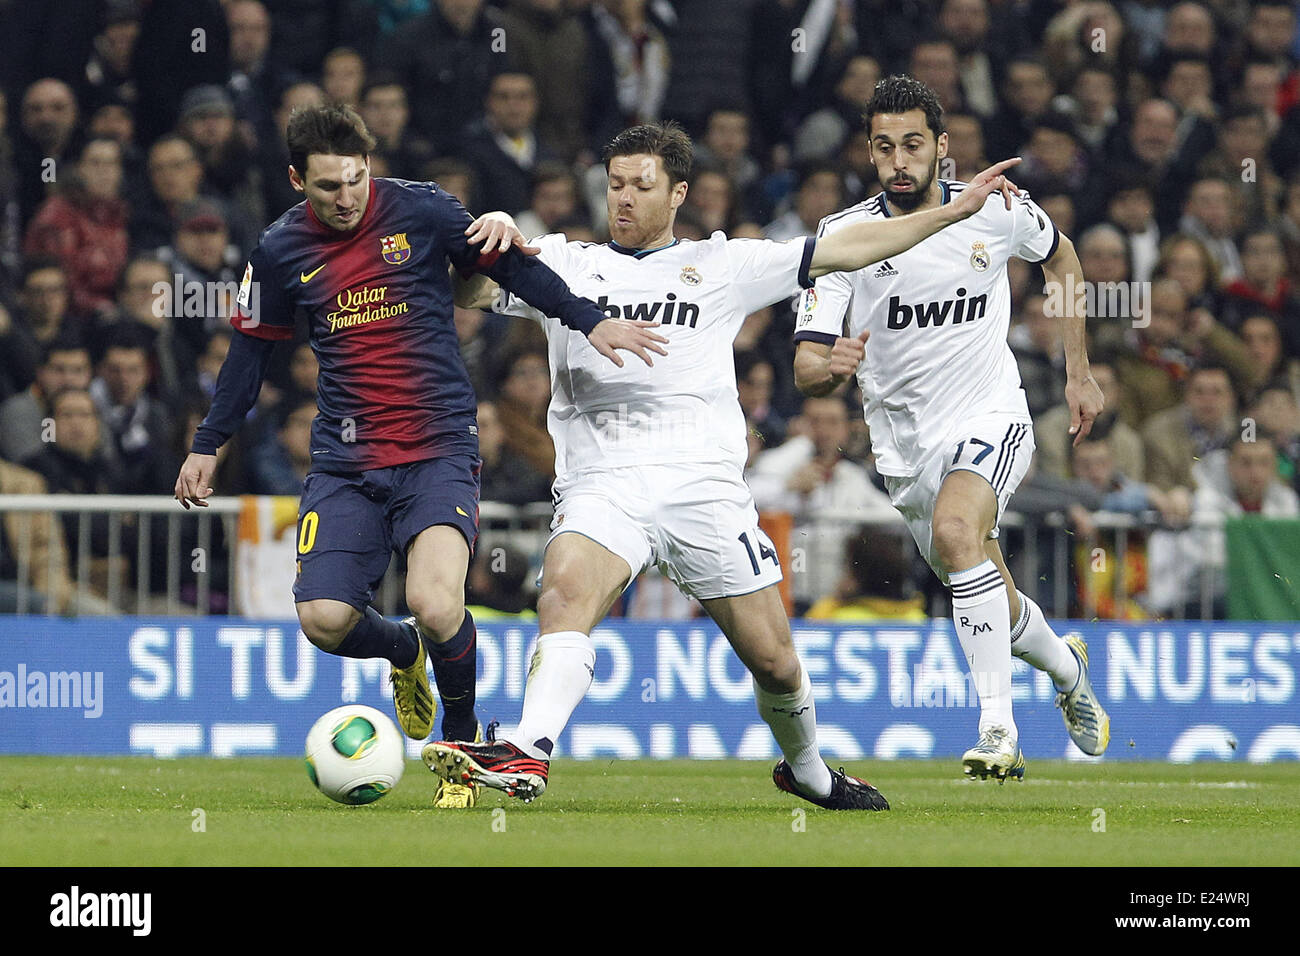 Real Madrid welcome Barcelona FC to the Santiago Bernabeu stadium in the Copa del Rey Semi-Final 1st leg. The match finished 1-1.  Featuring: Lionel Messi,Xabi Alonso,Alvaro Arbeloa Where: Madrid, Spain When: 30 Jan 2013 Stock Photo